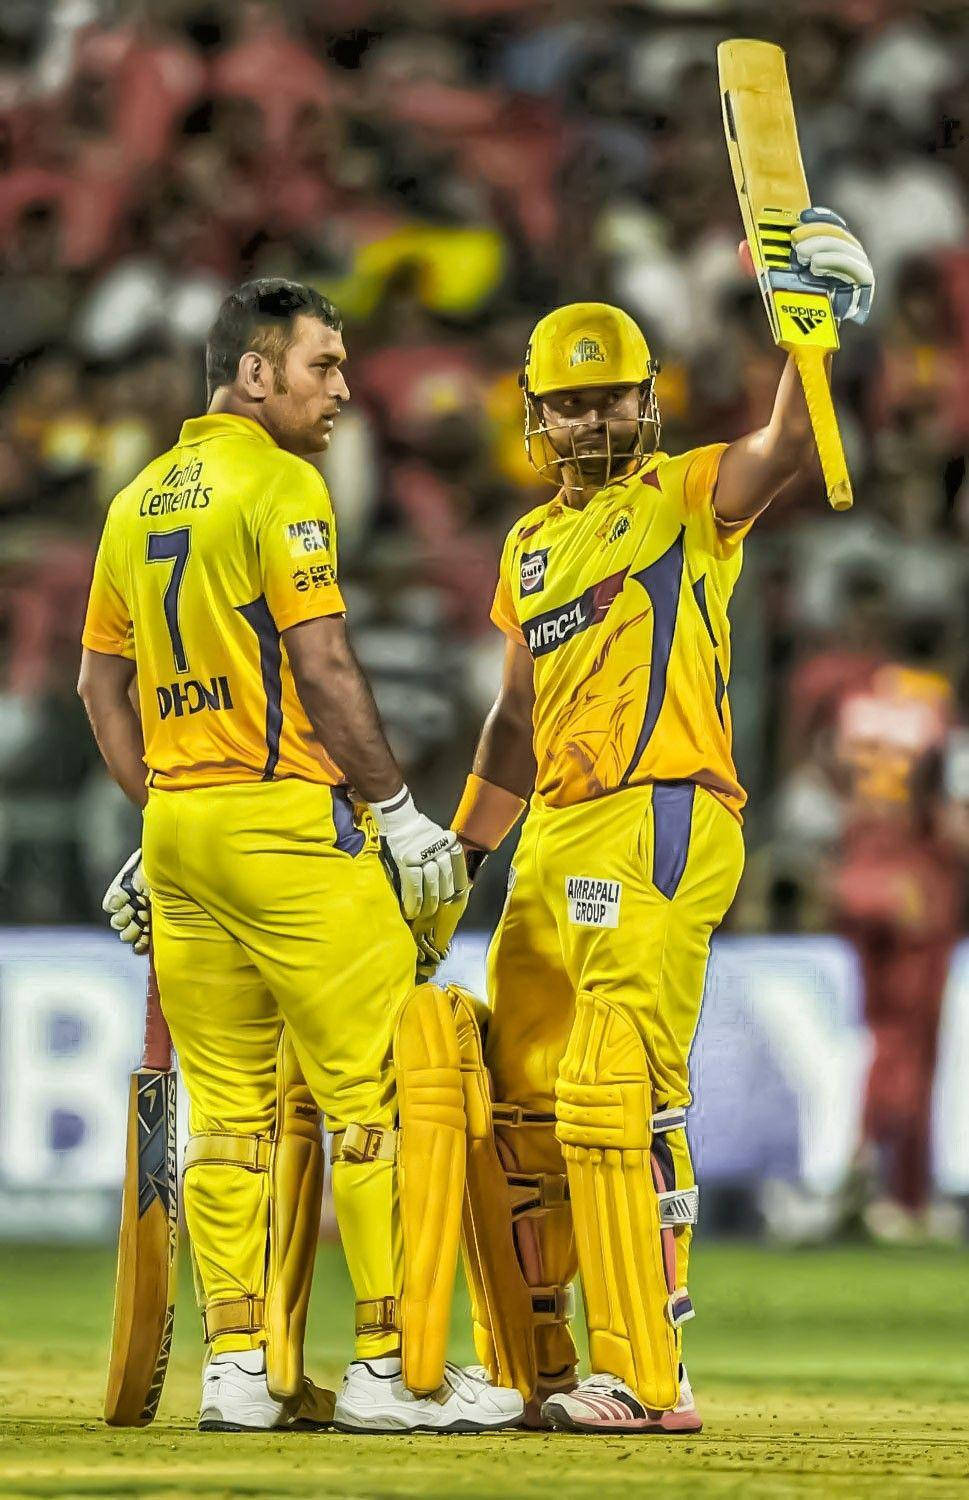 Suresh Raina In Csk Jersey, Stepping Up For The Game Wallpaper